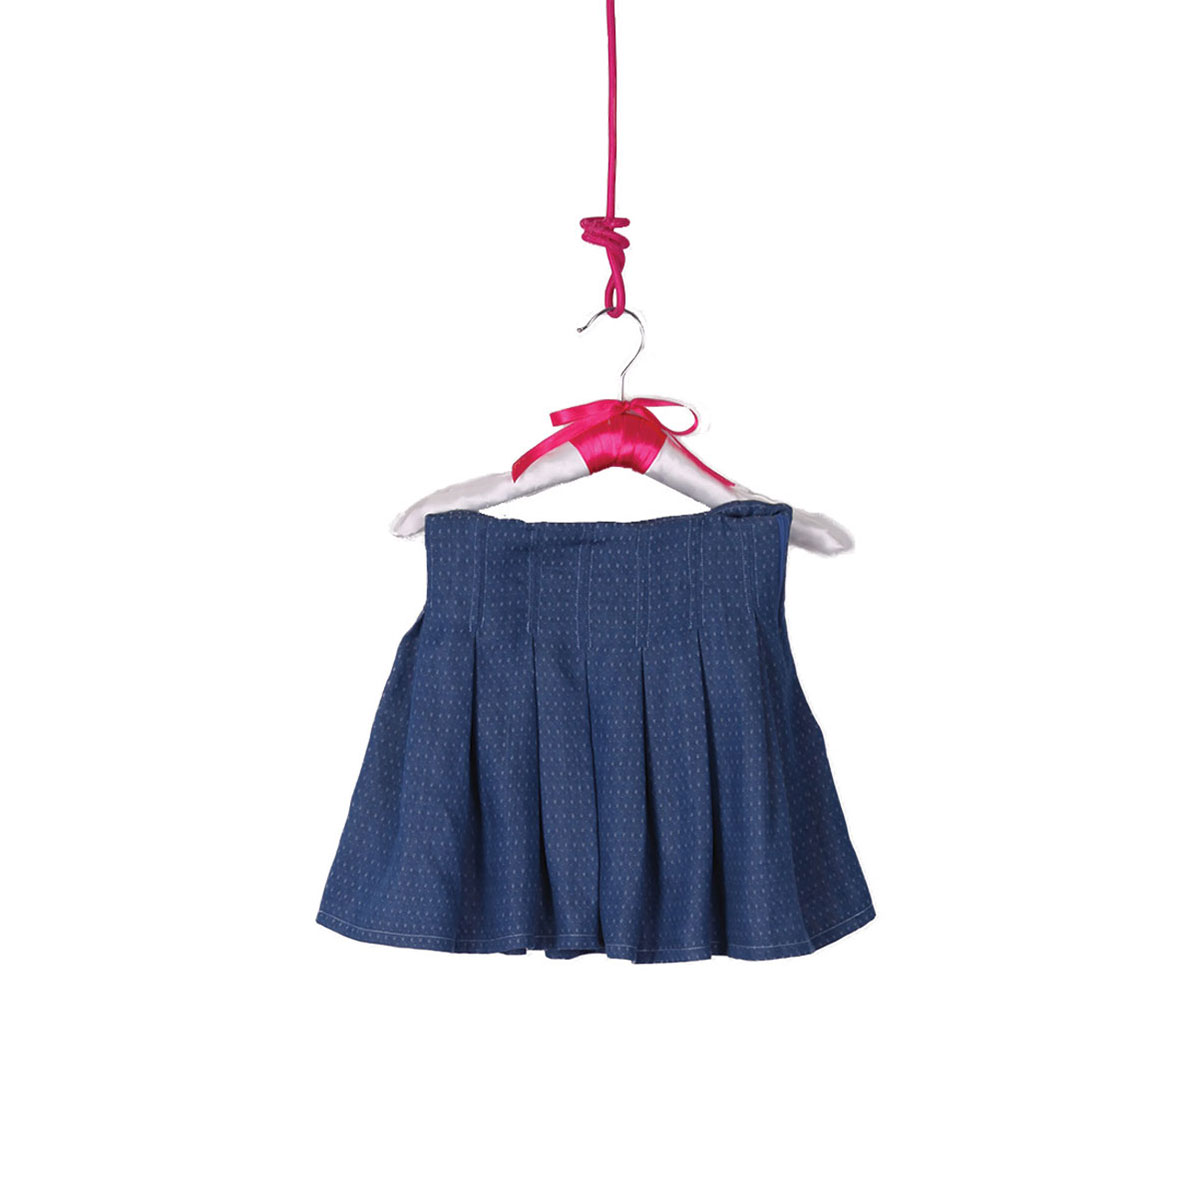 Patron Enfant Jupe - Dragibus - Made in Me Couture